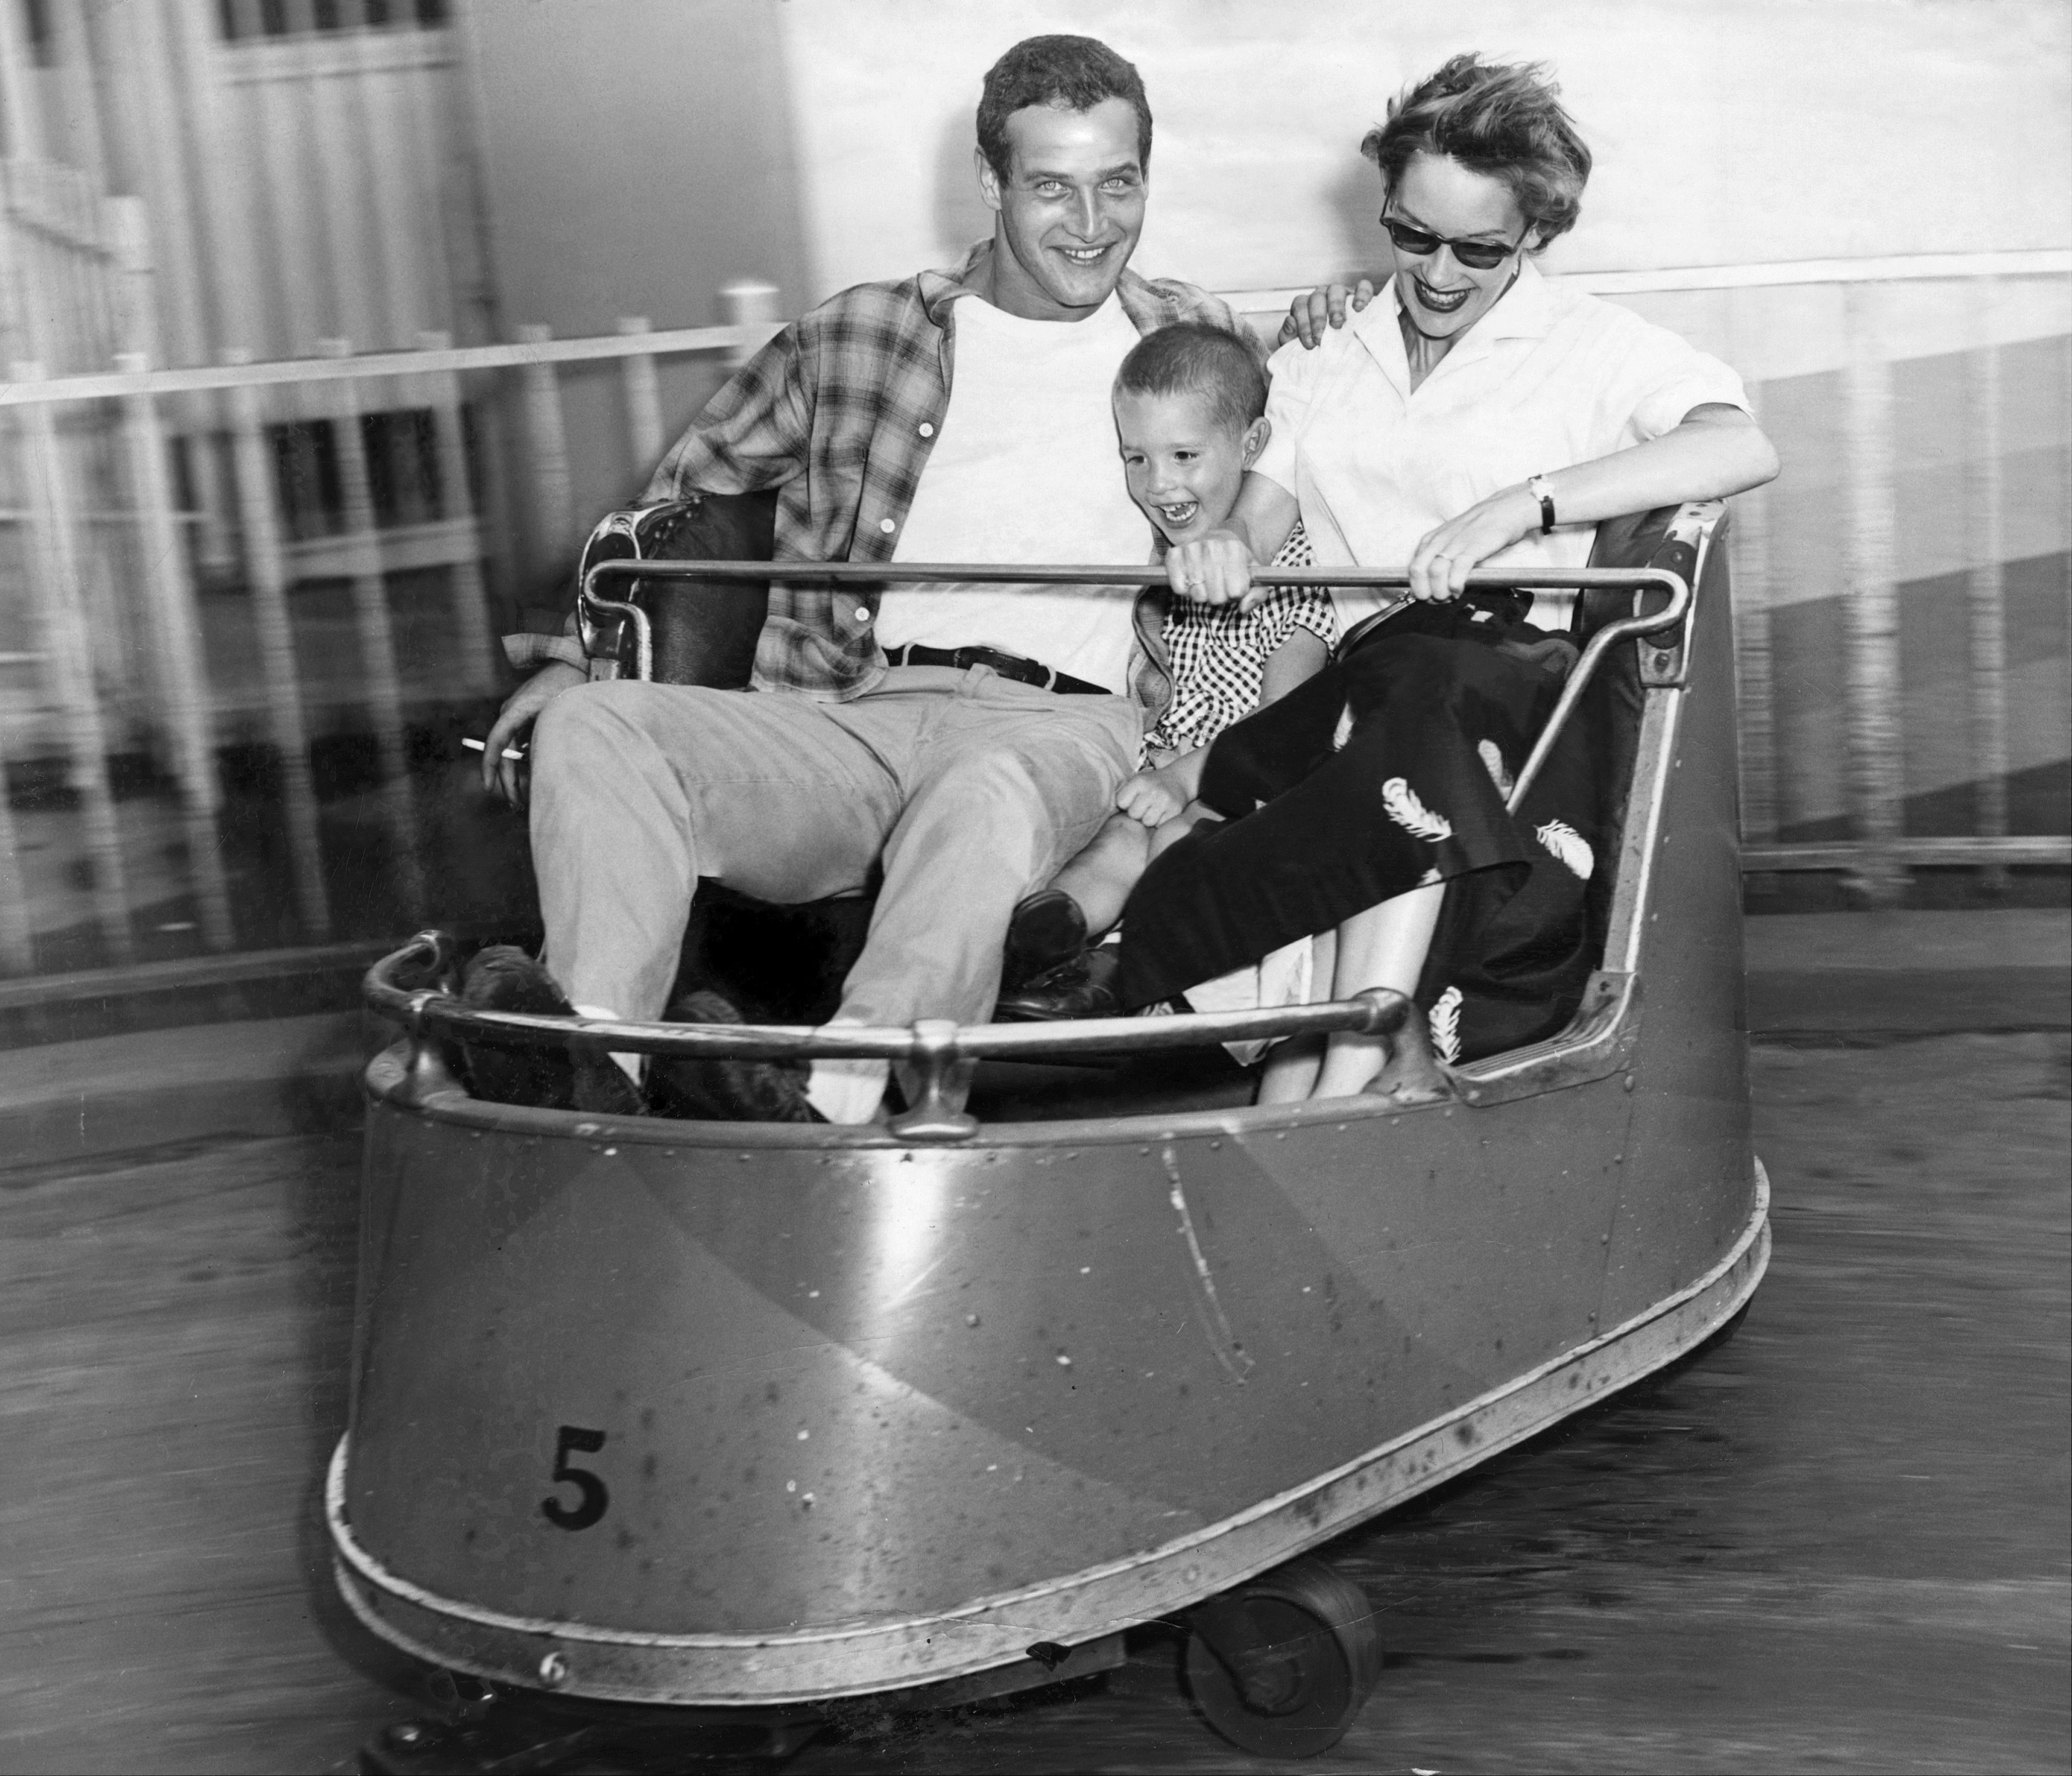 Paul Newman rides the Whip with his first wife Jackie and their son at Rockaway's Playland. | Source: Getty Images